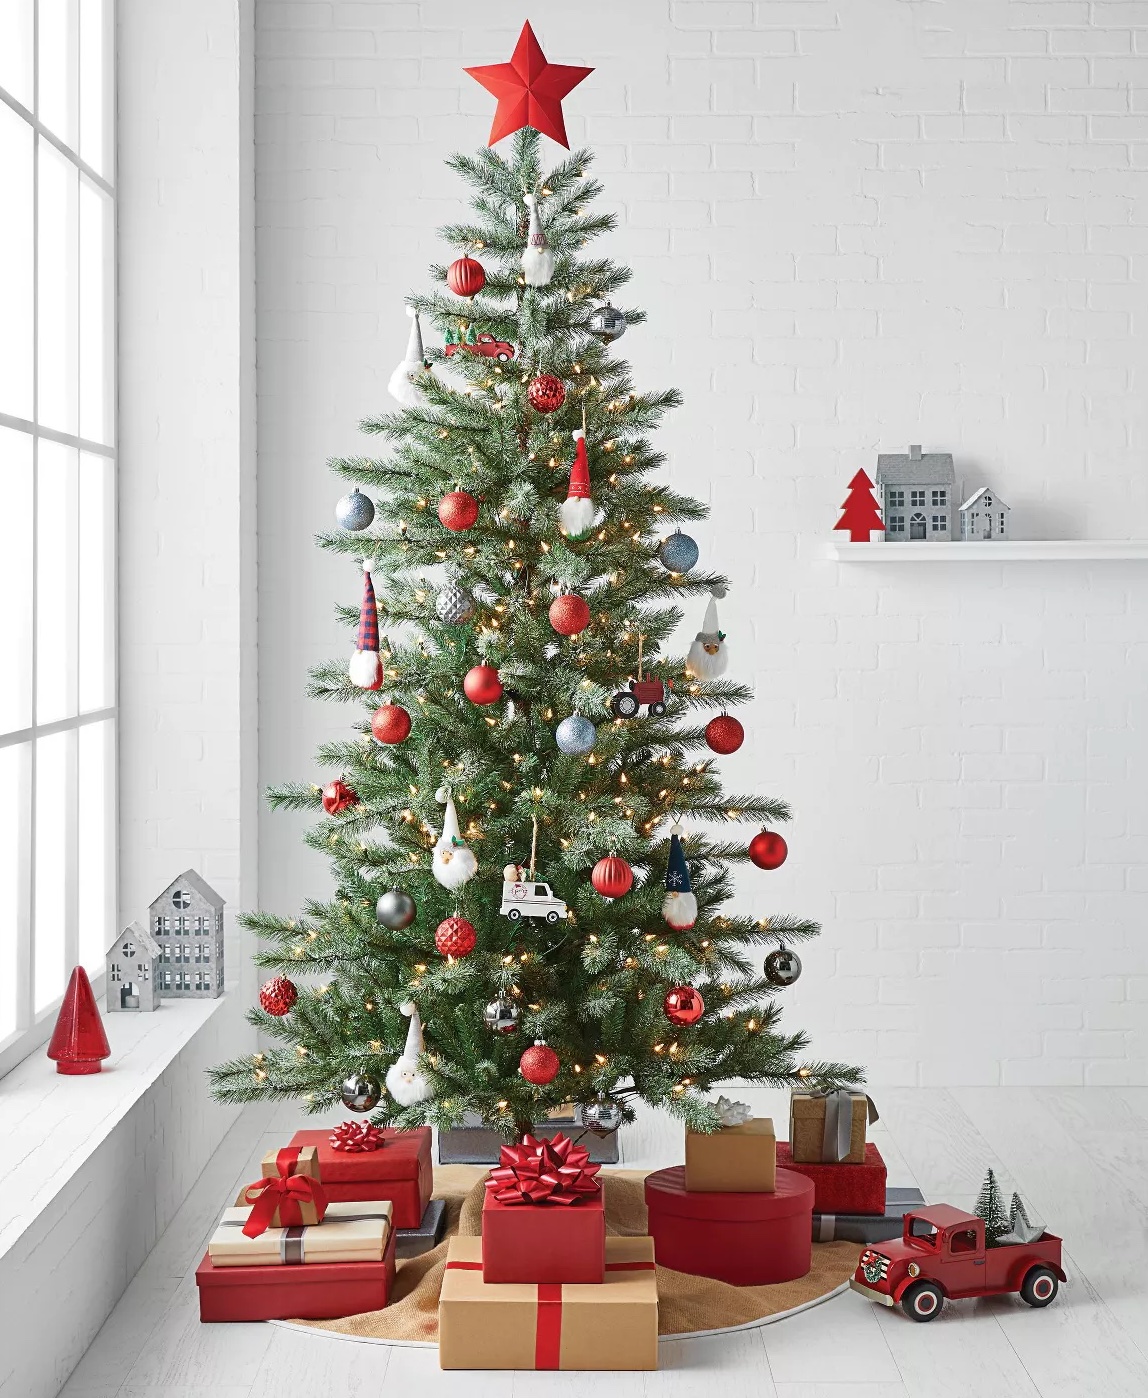 Christmas Tree Ideas at Target | Red and White Tree Decor